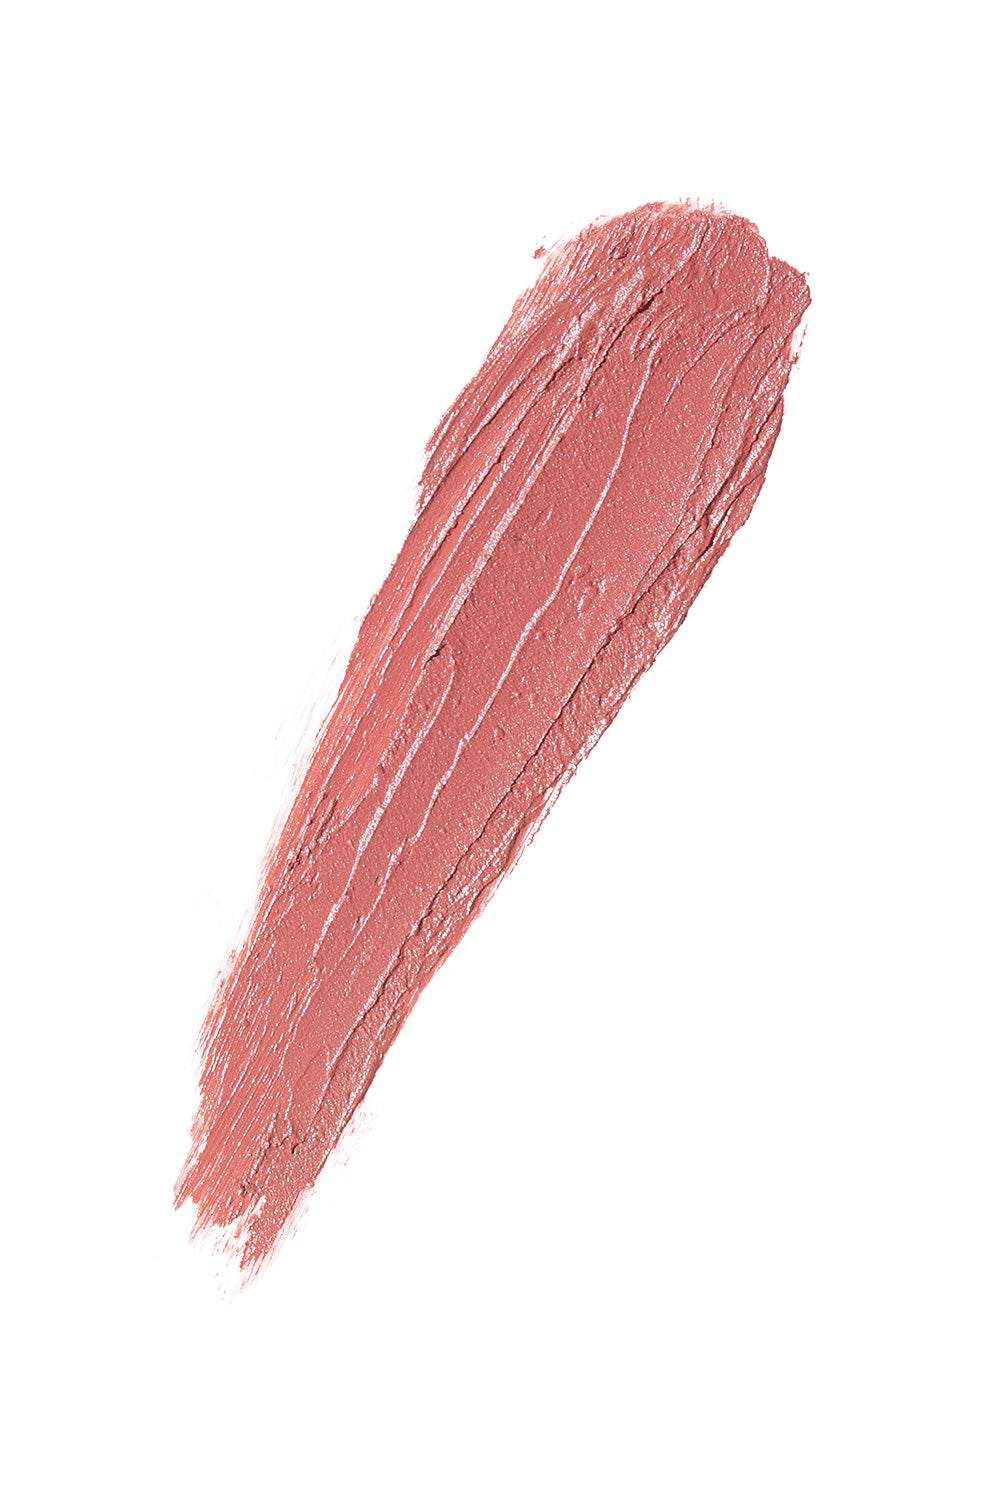 Whipped - Type 2 Lipstick